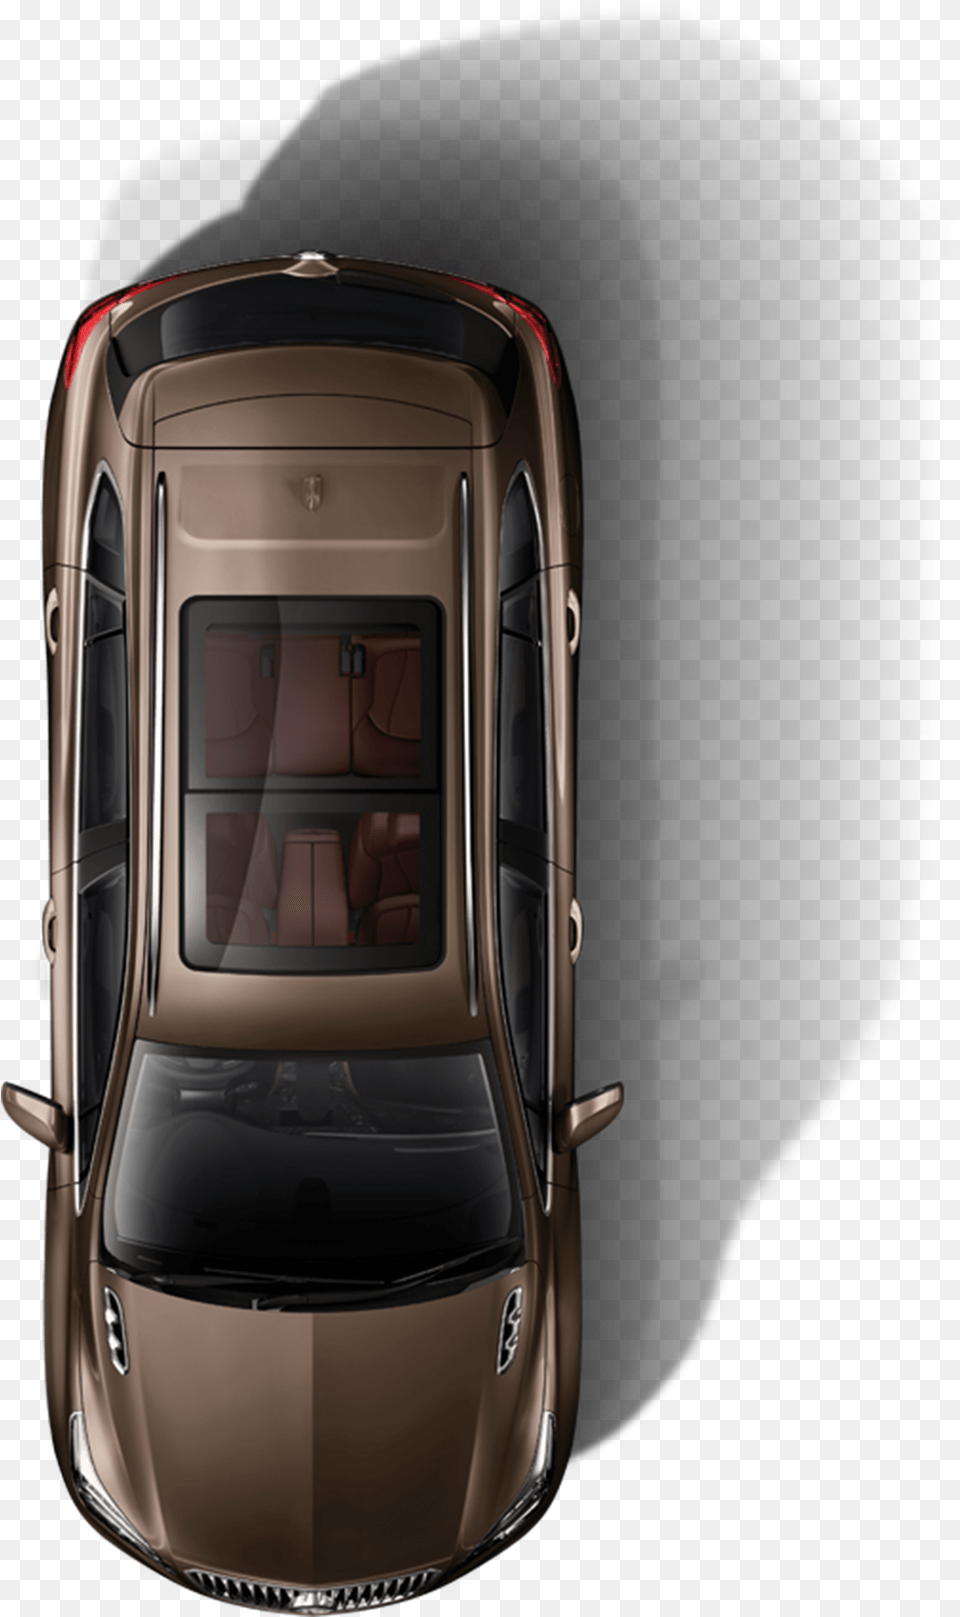 Hd Car Top View Car Top View, Appliance, Device, Electrical Device, Washer Png Image